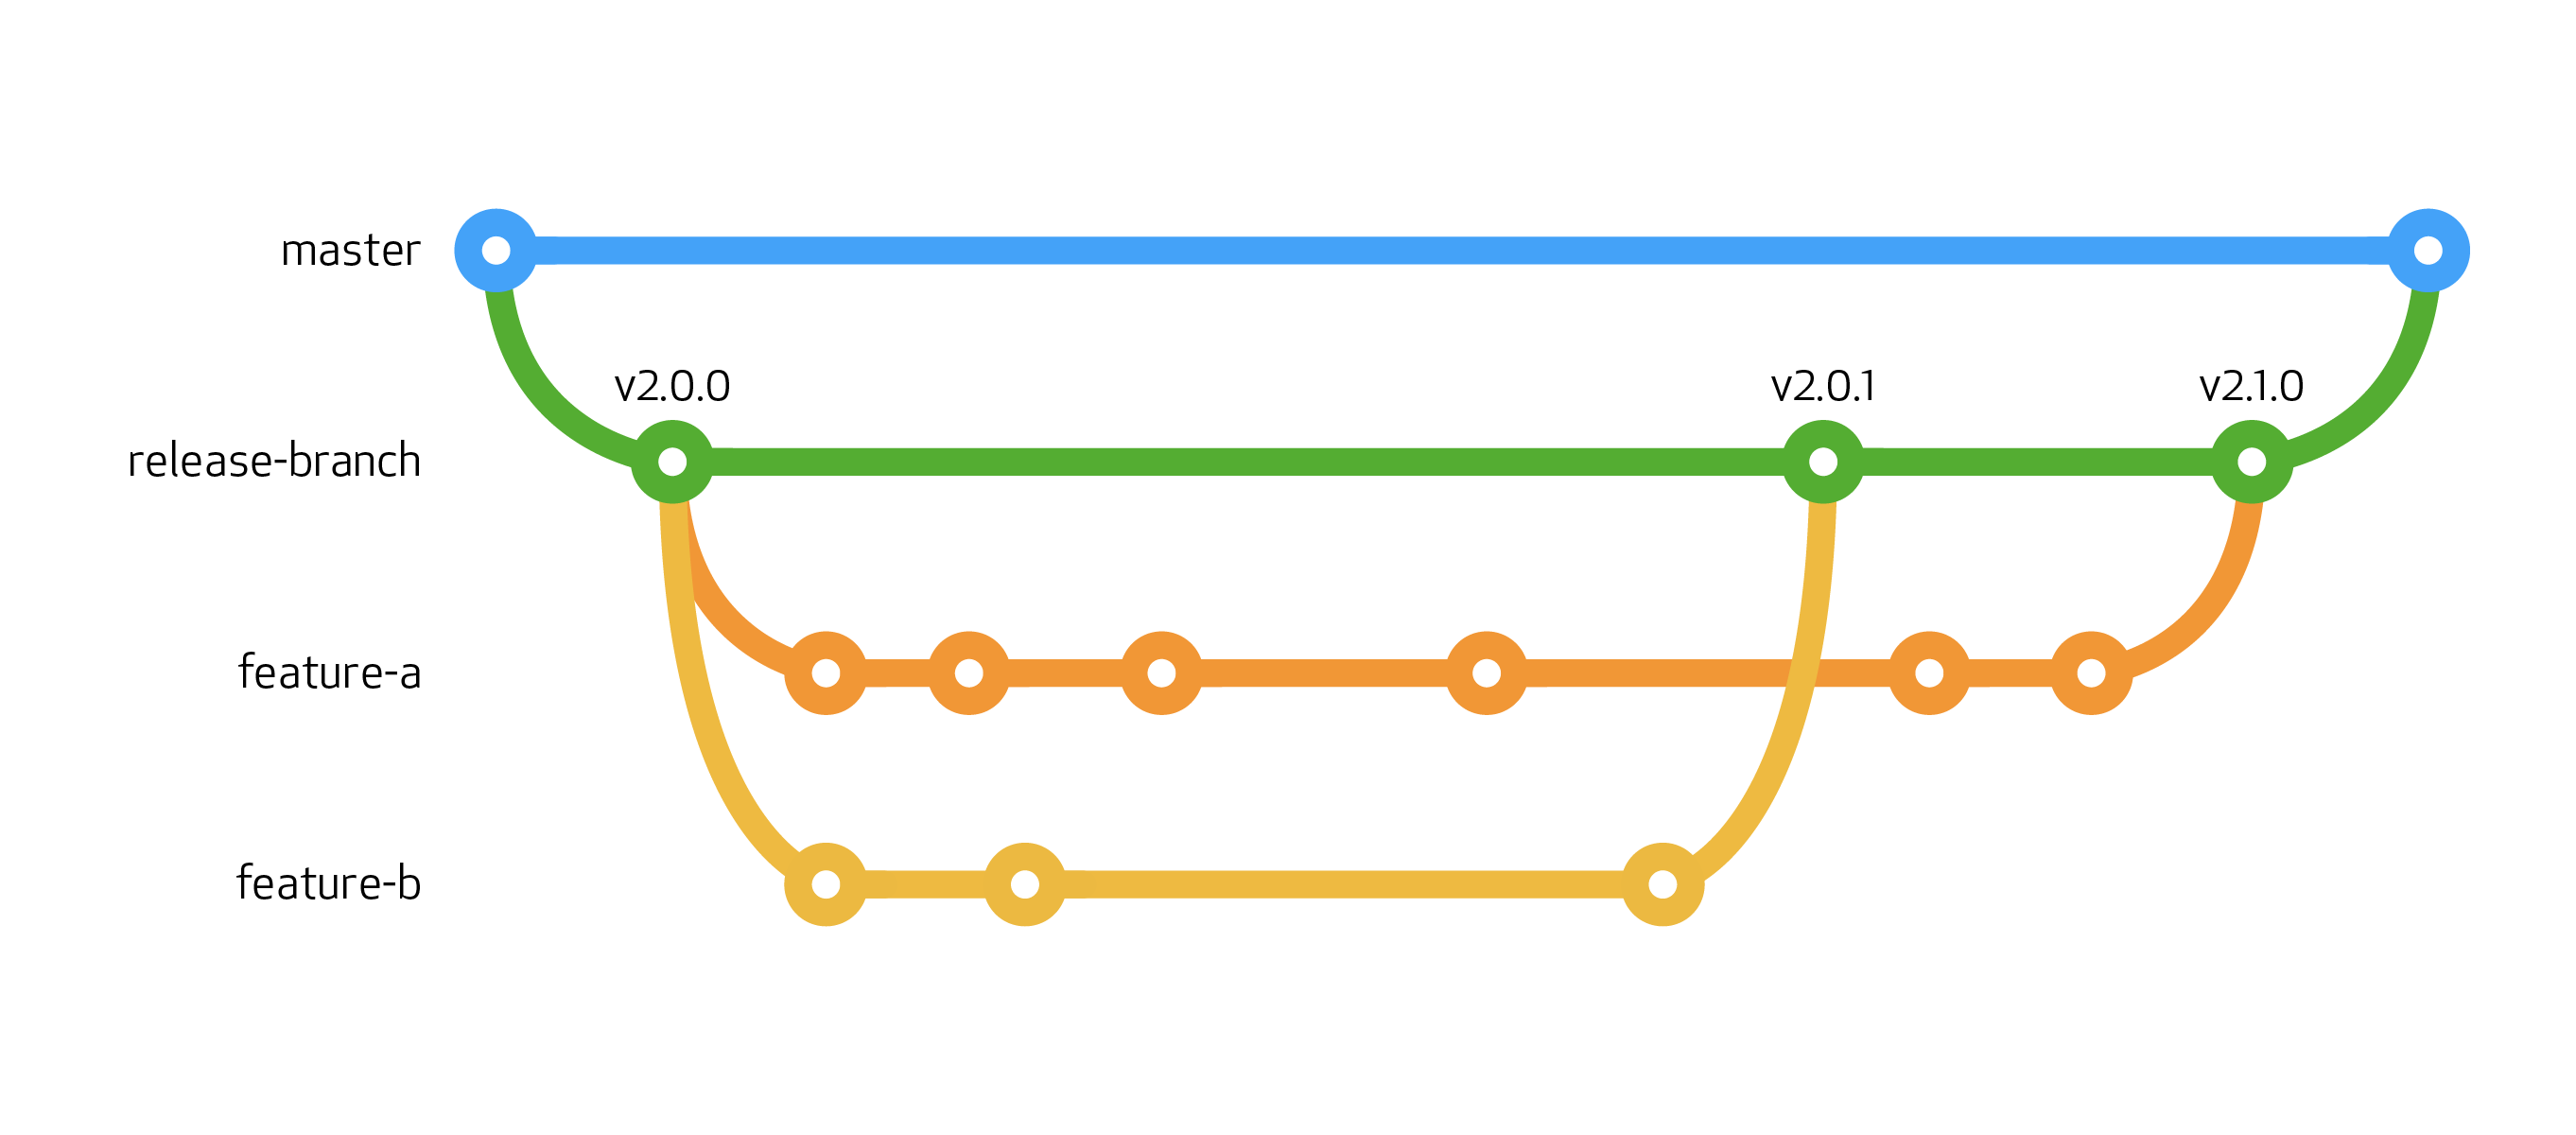 Git flow diagram showing master branch, release branch, two feature branches, and release versions